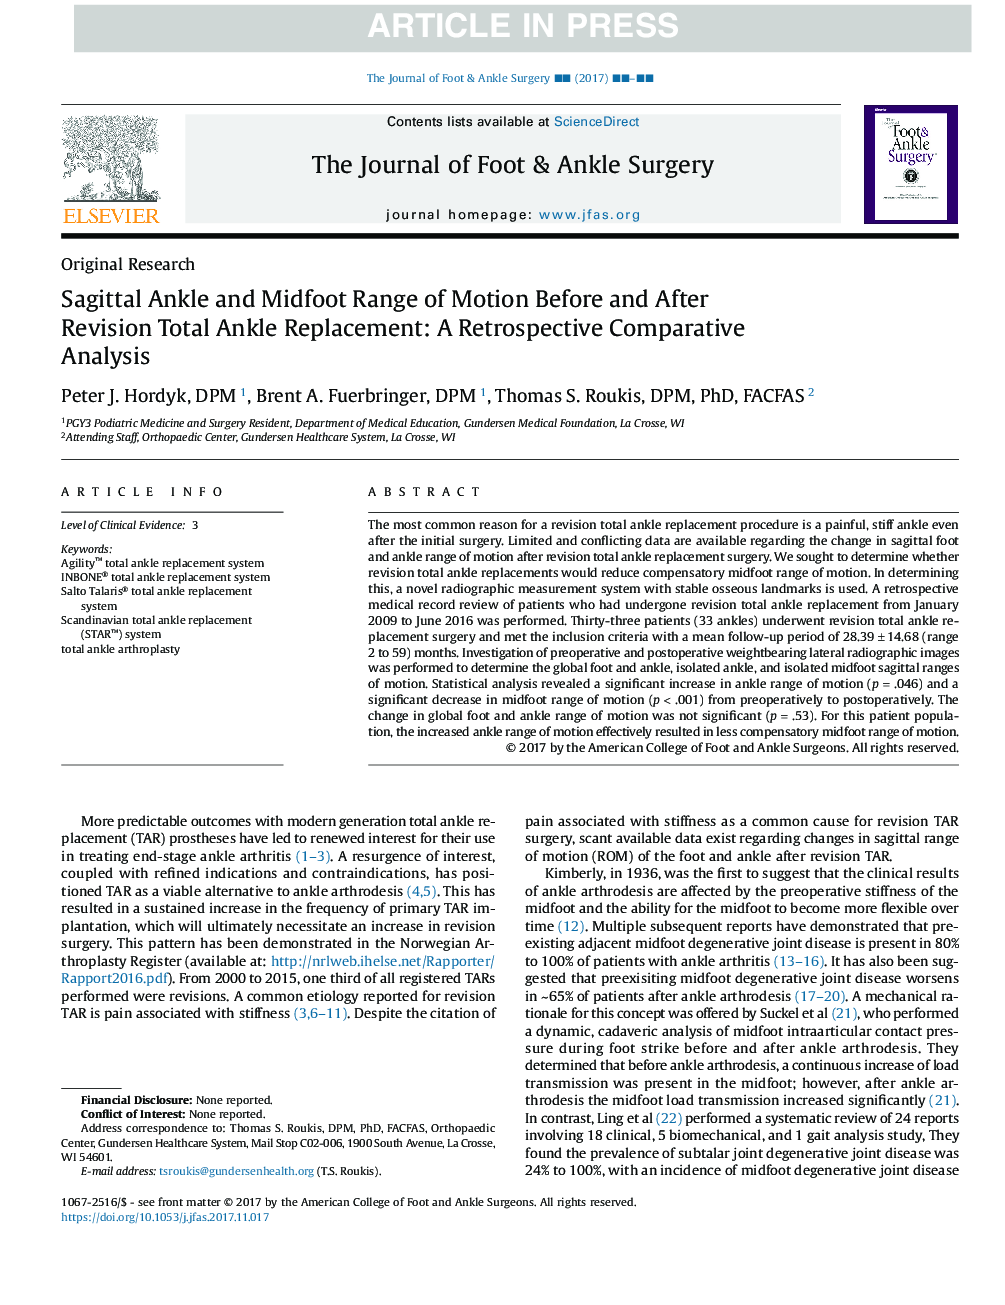 Sagittal Ankle and Midfoot Range of Motion Before and After Revision Total Ankle Replacement: A Retrospective Comparative Analysis